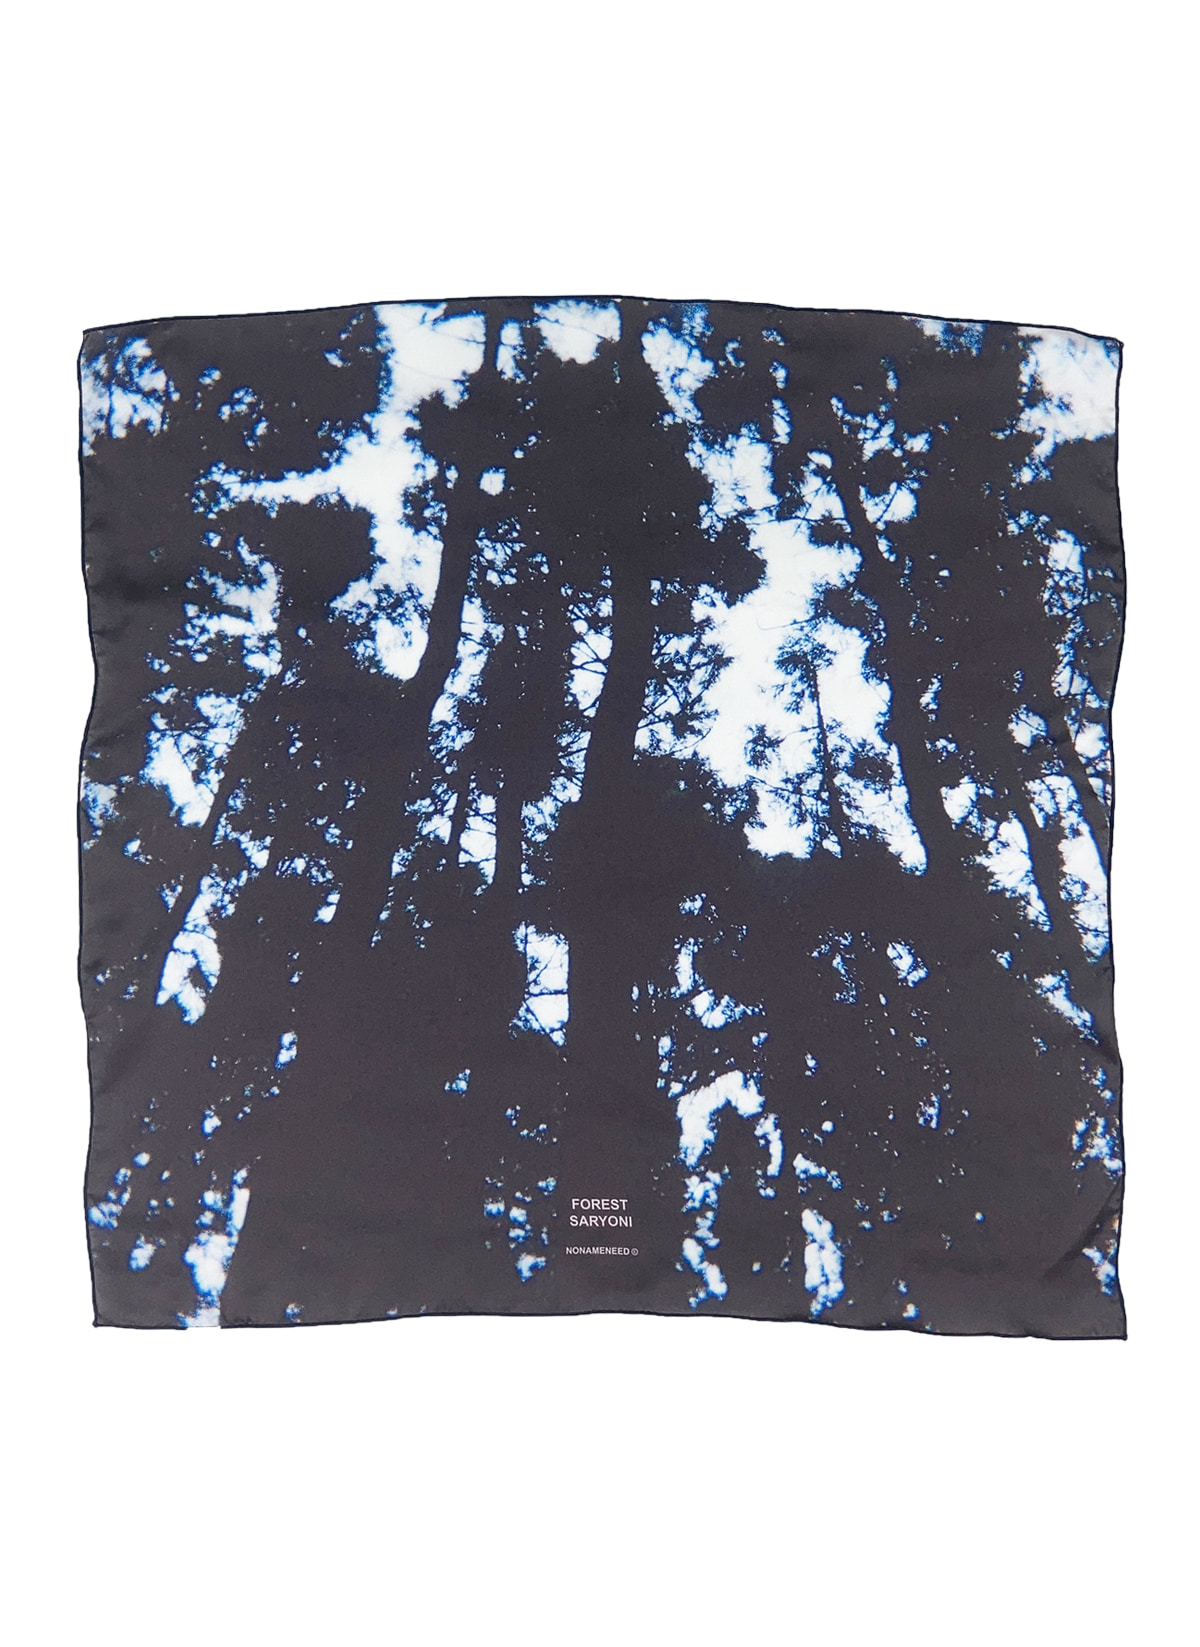 FOREST SARYONI SCARF